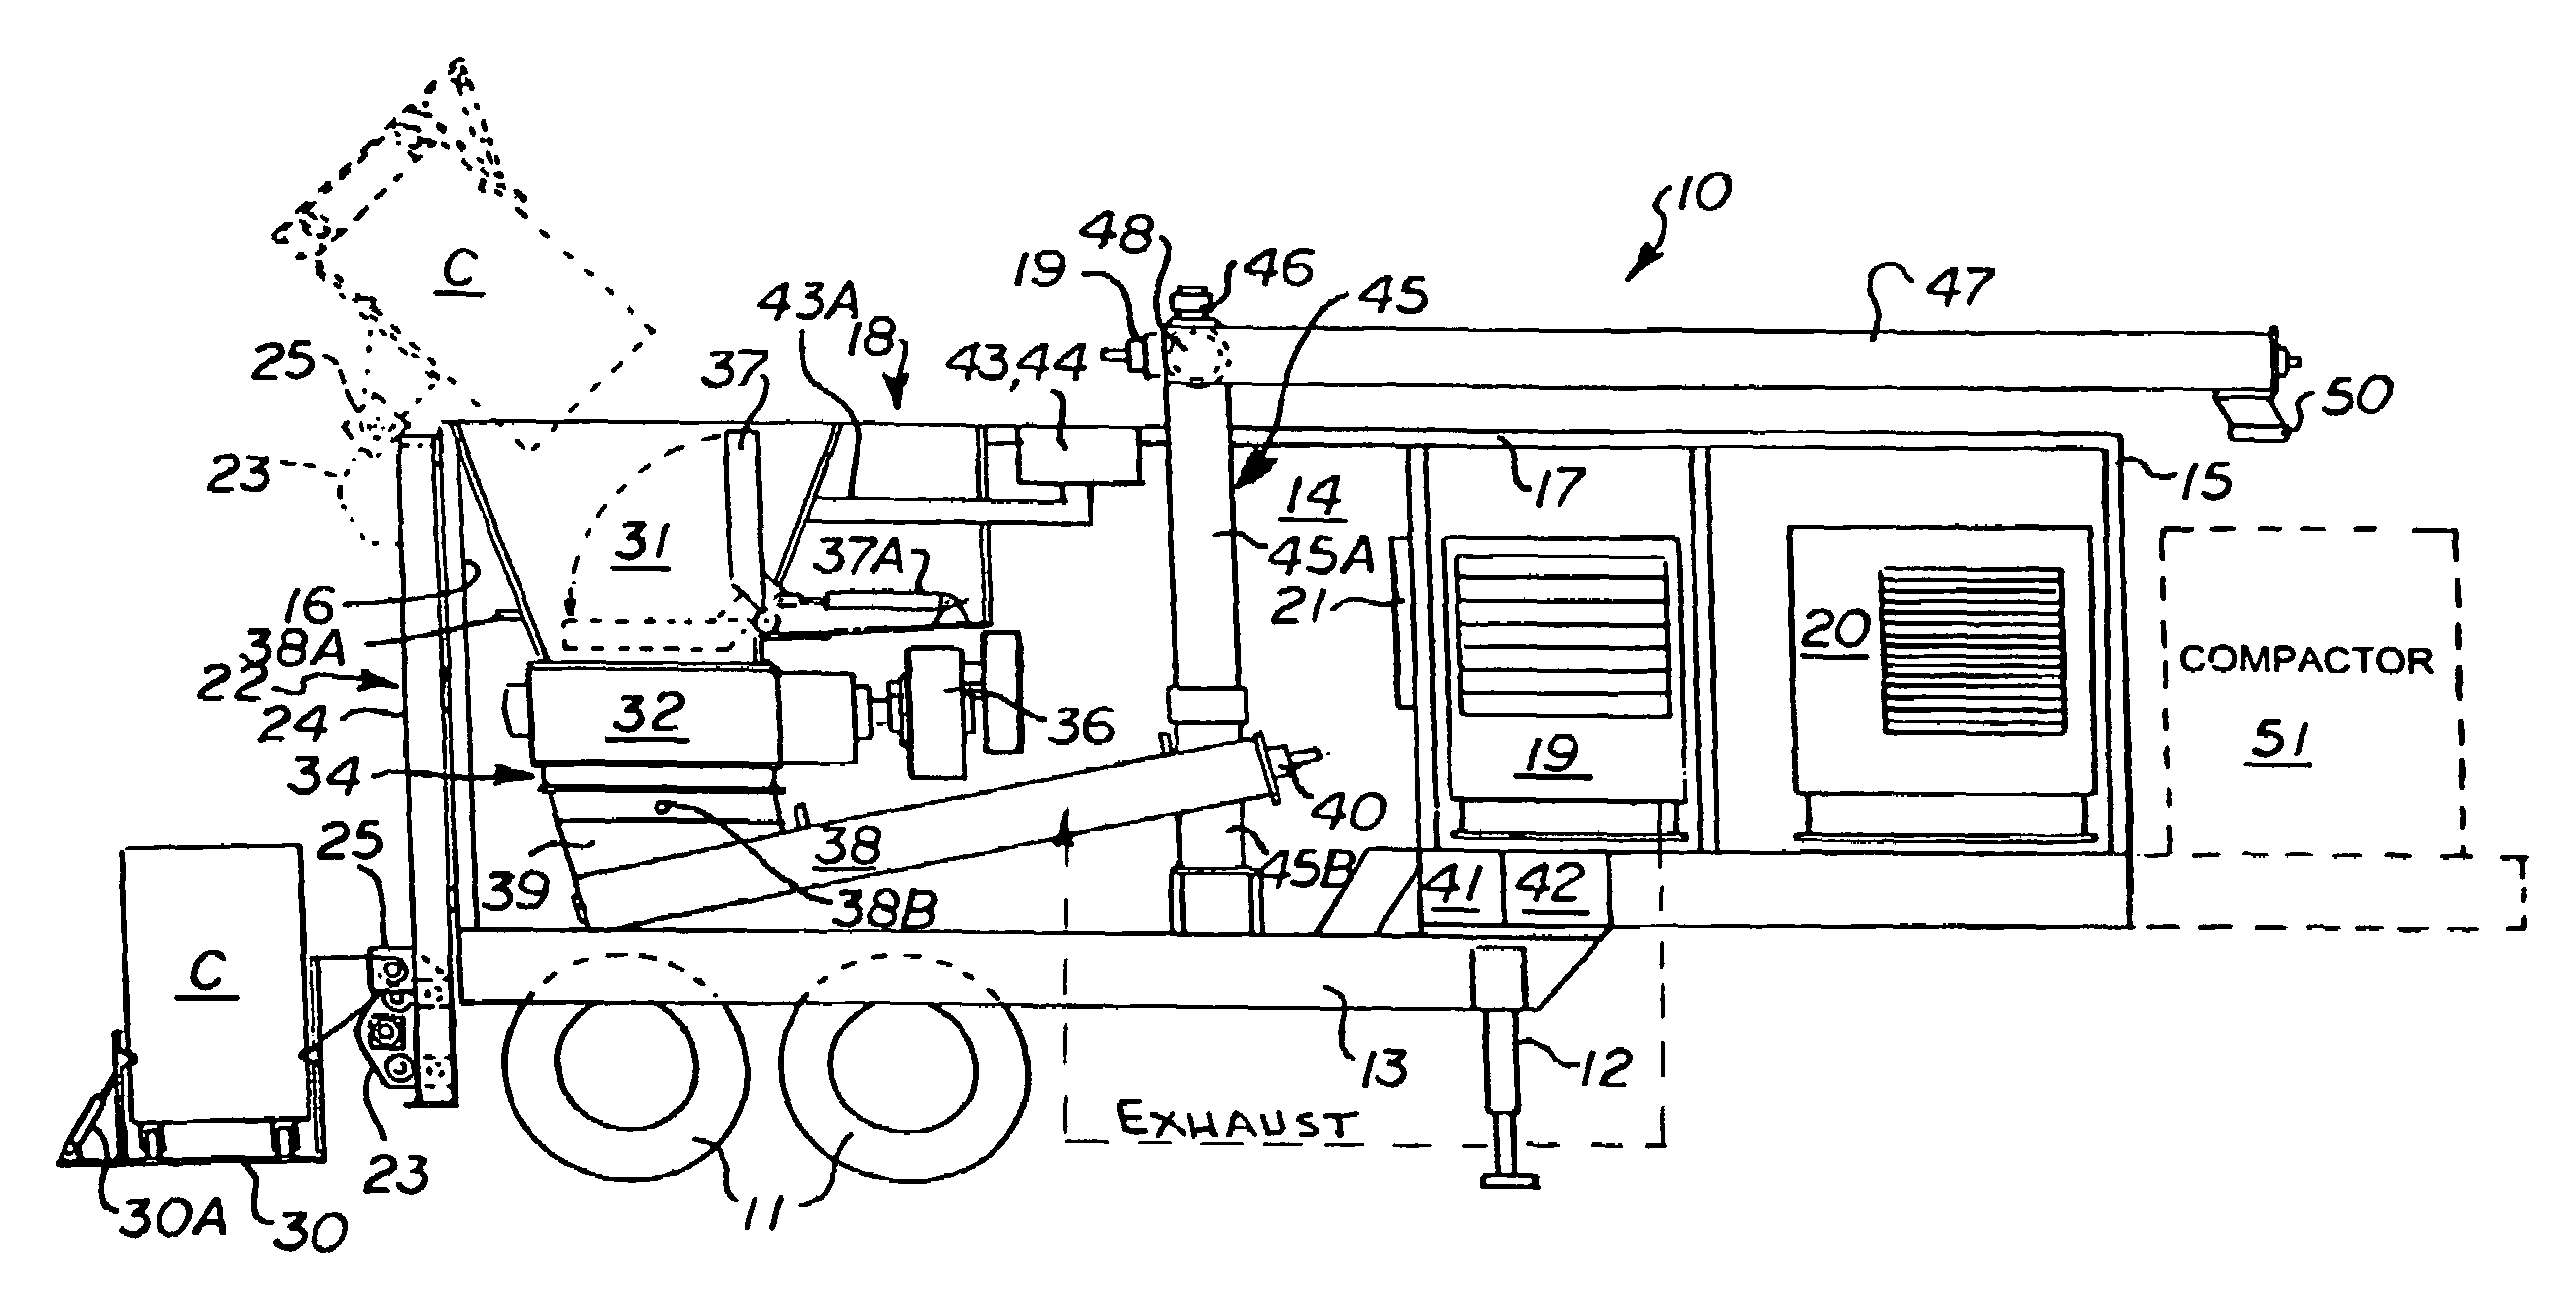 Mobile apparatus and process for treating infectious waste